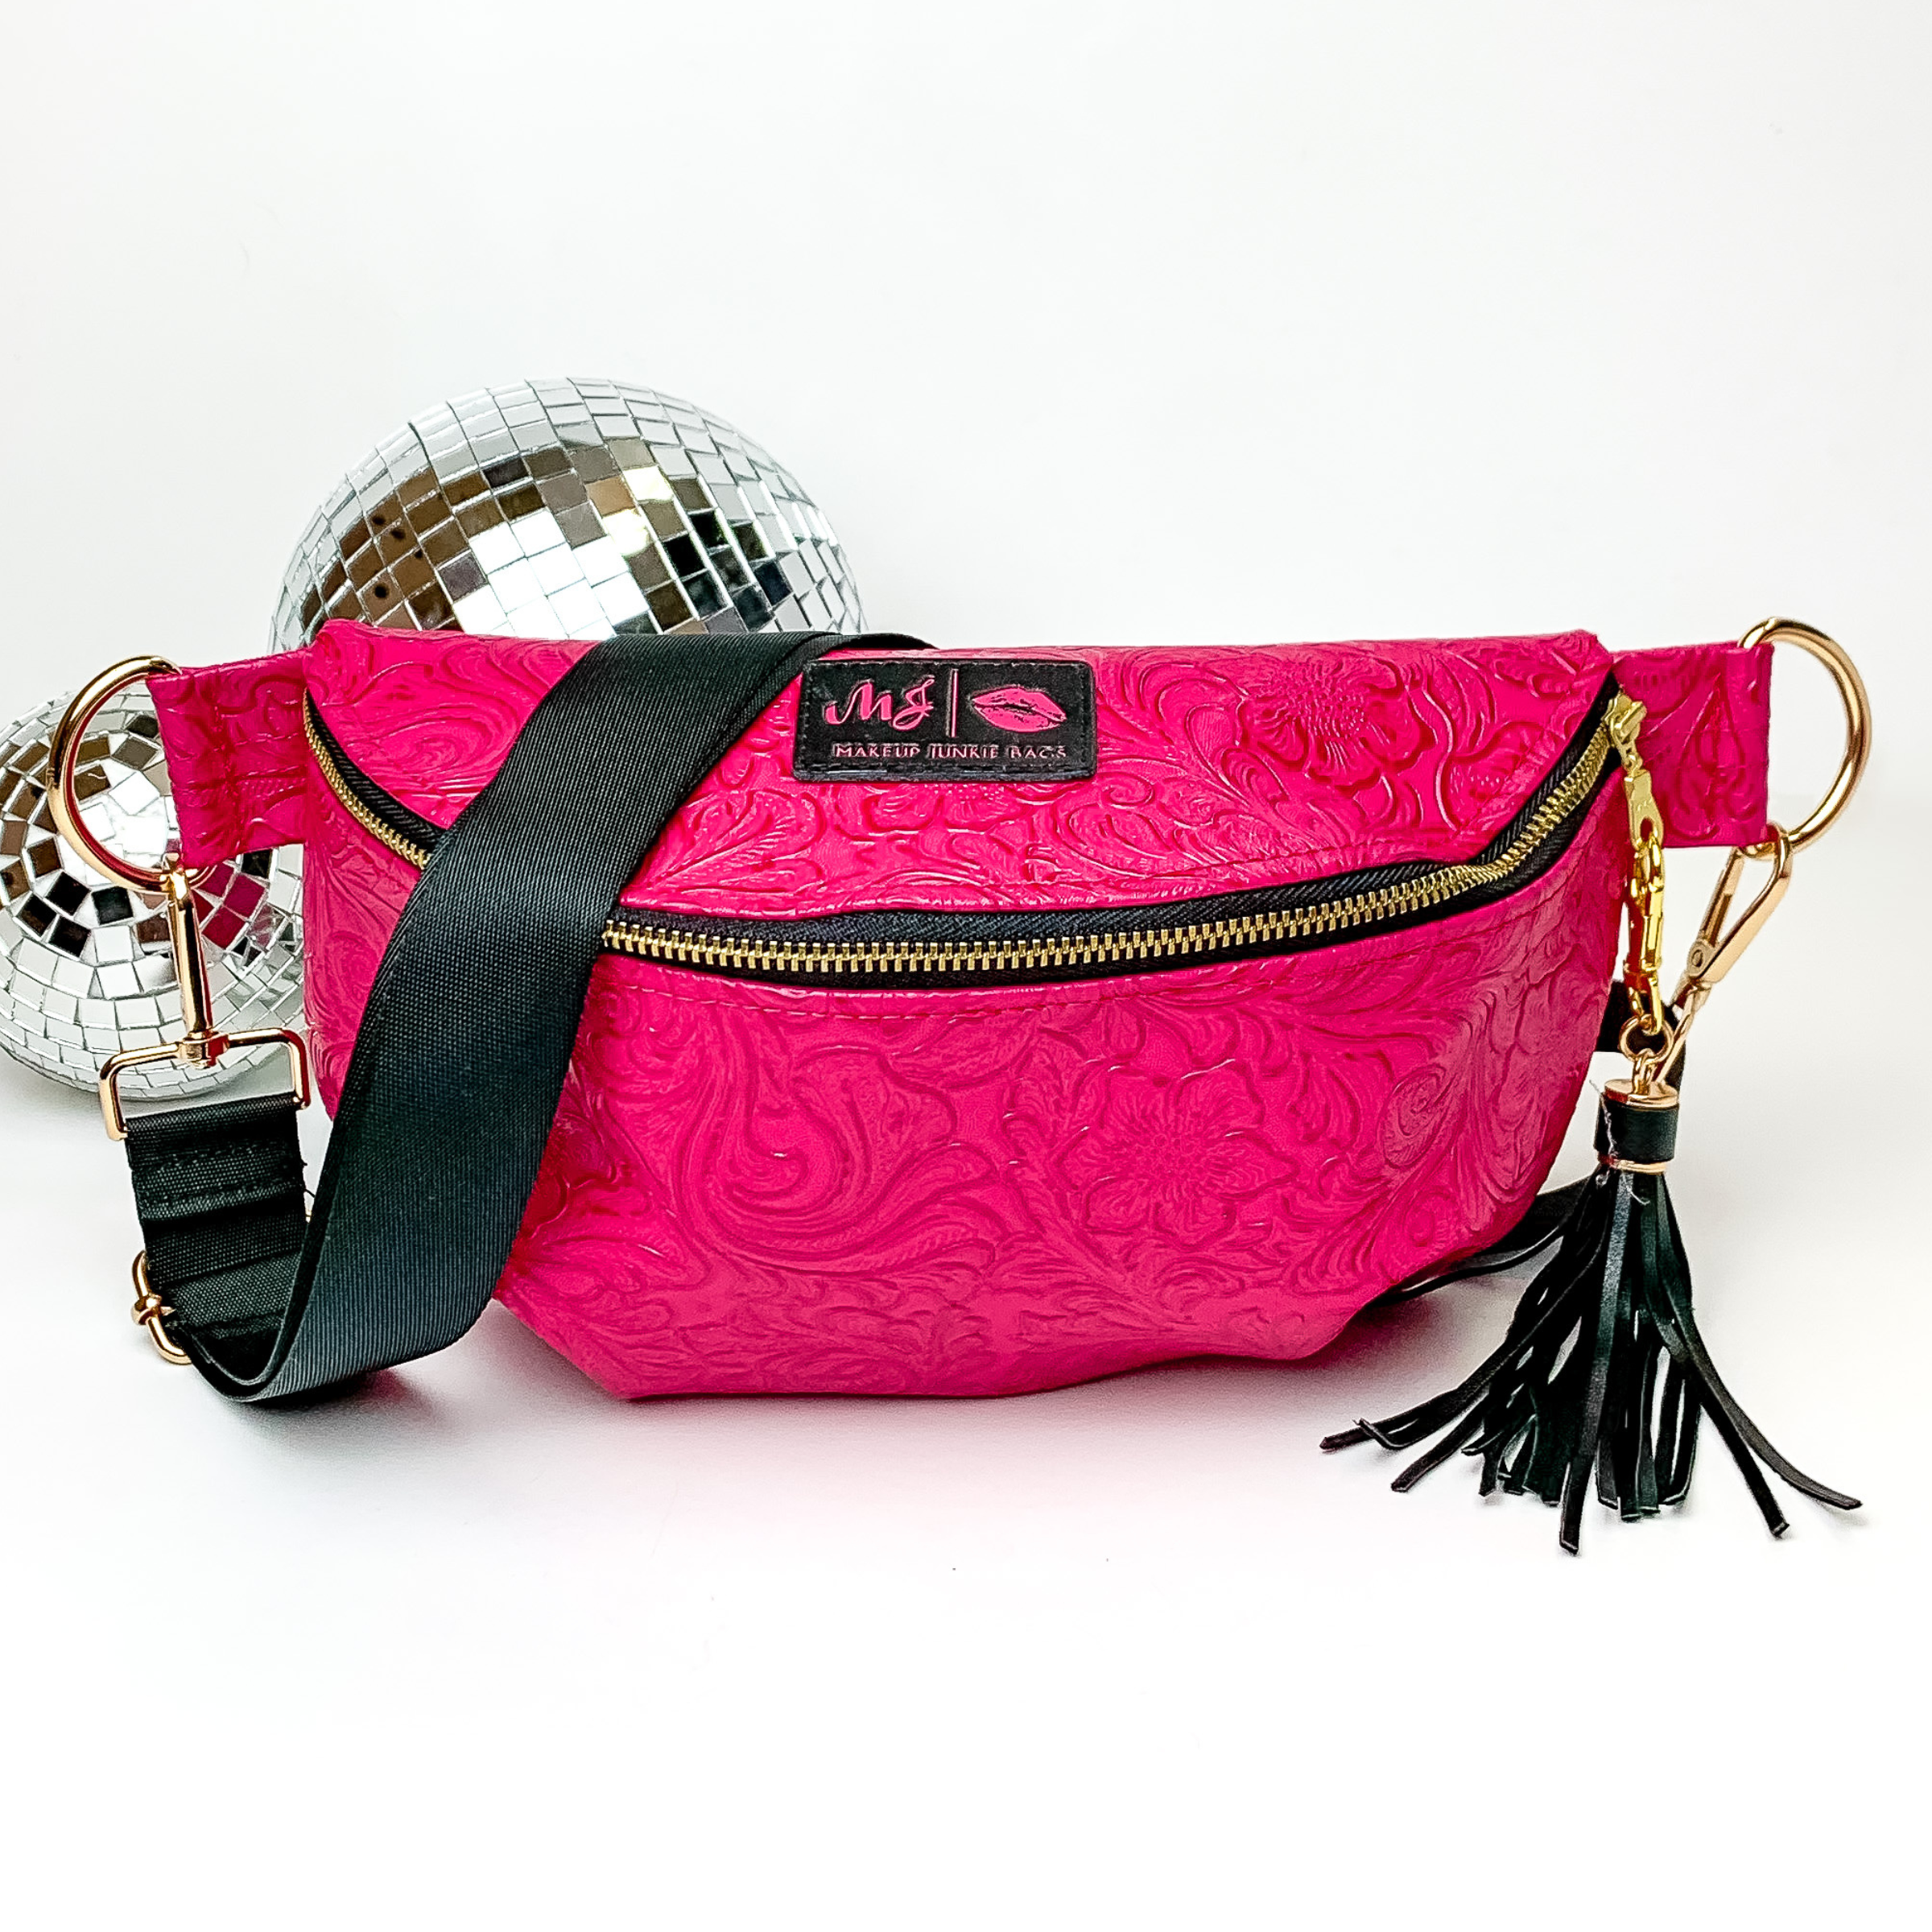 Hot pink, tooled print fanny pack with a black strap. This bag includes gold accents, a gold zipper, and a gold tassel. This bag also has a pink stitched logo for Makeup Junkie. This fanny pack is pictured on a white background in front of disco balls. 